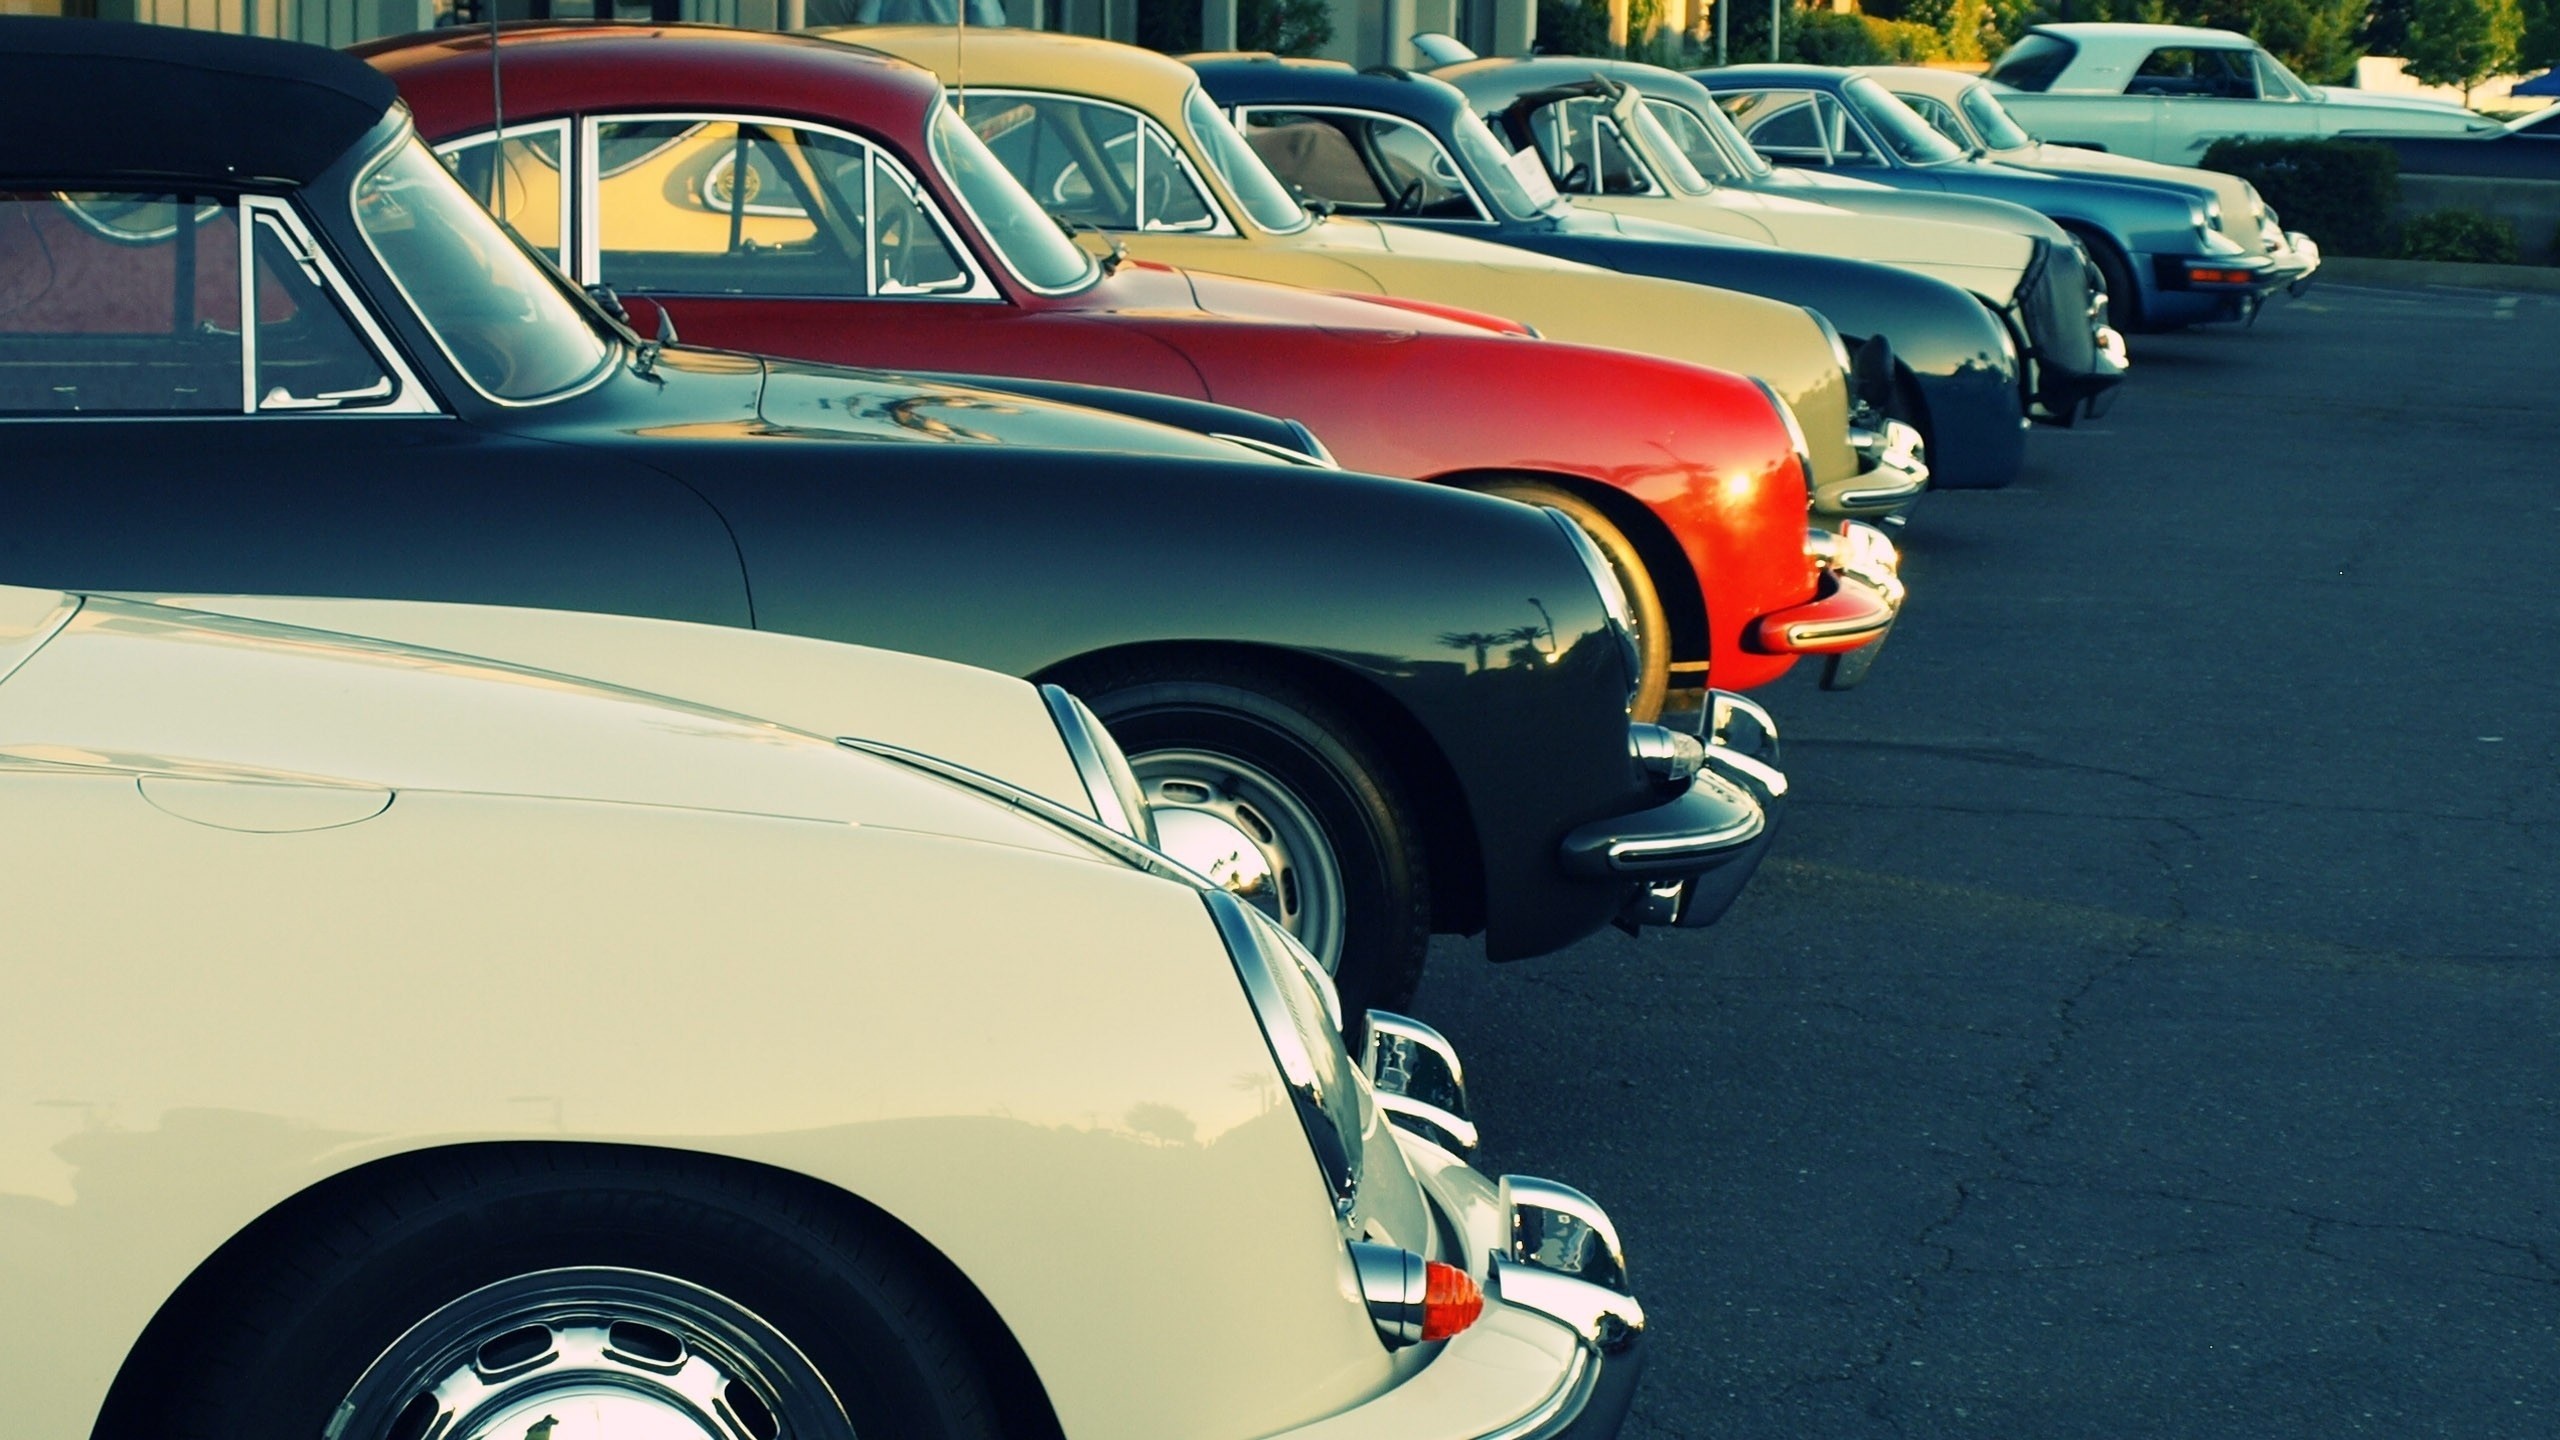 Vintage And Classic Cars In Row Image HD Wallpaper